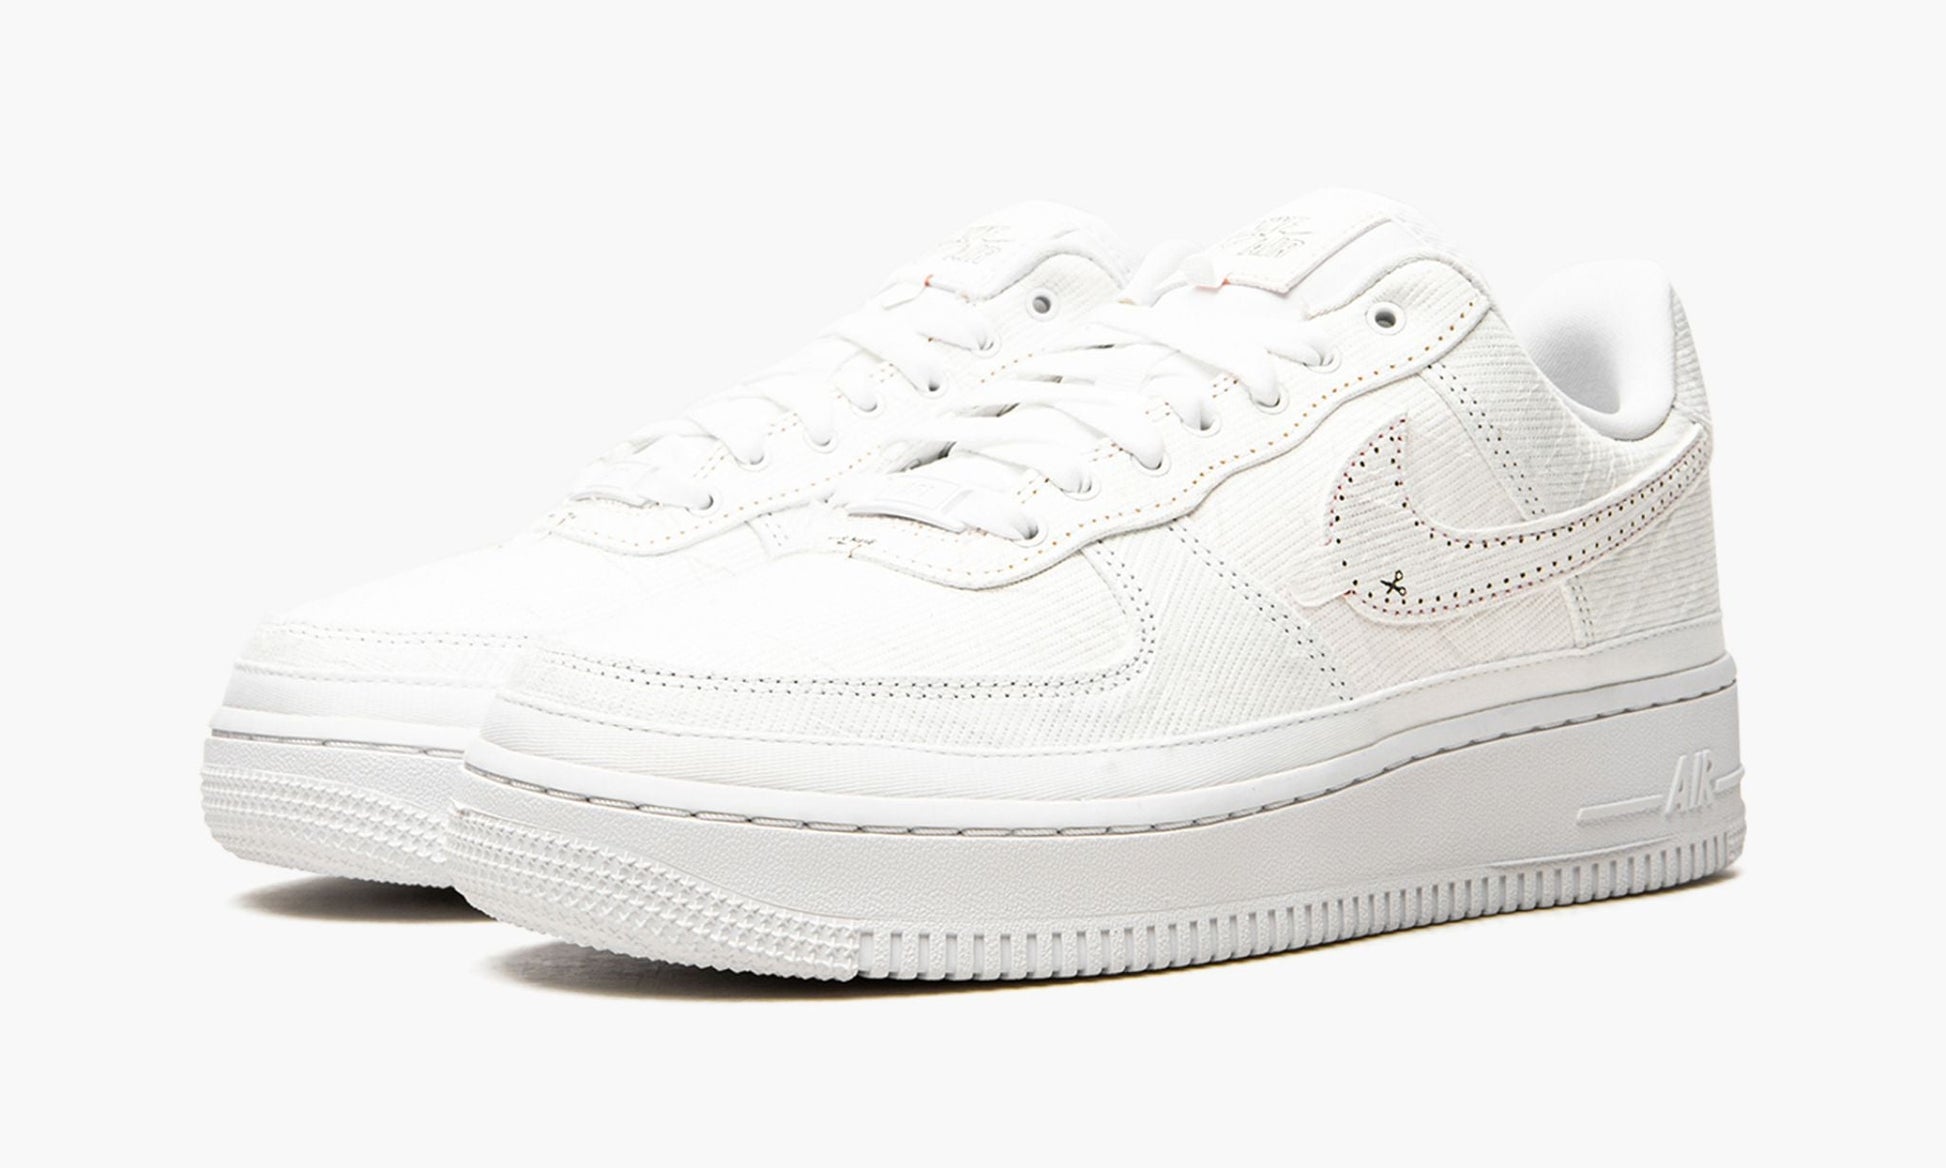 Air Force 1 Low LX WMNS "Reveal"